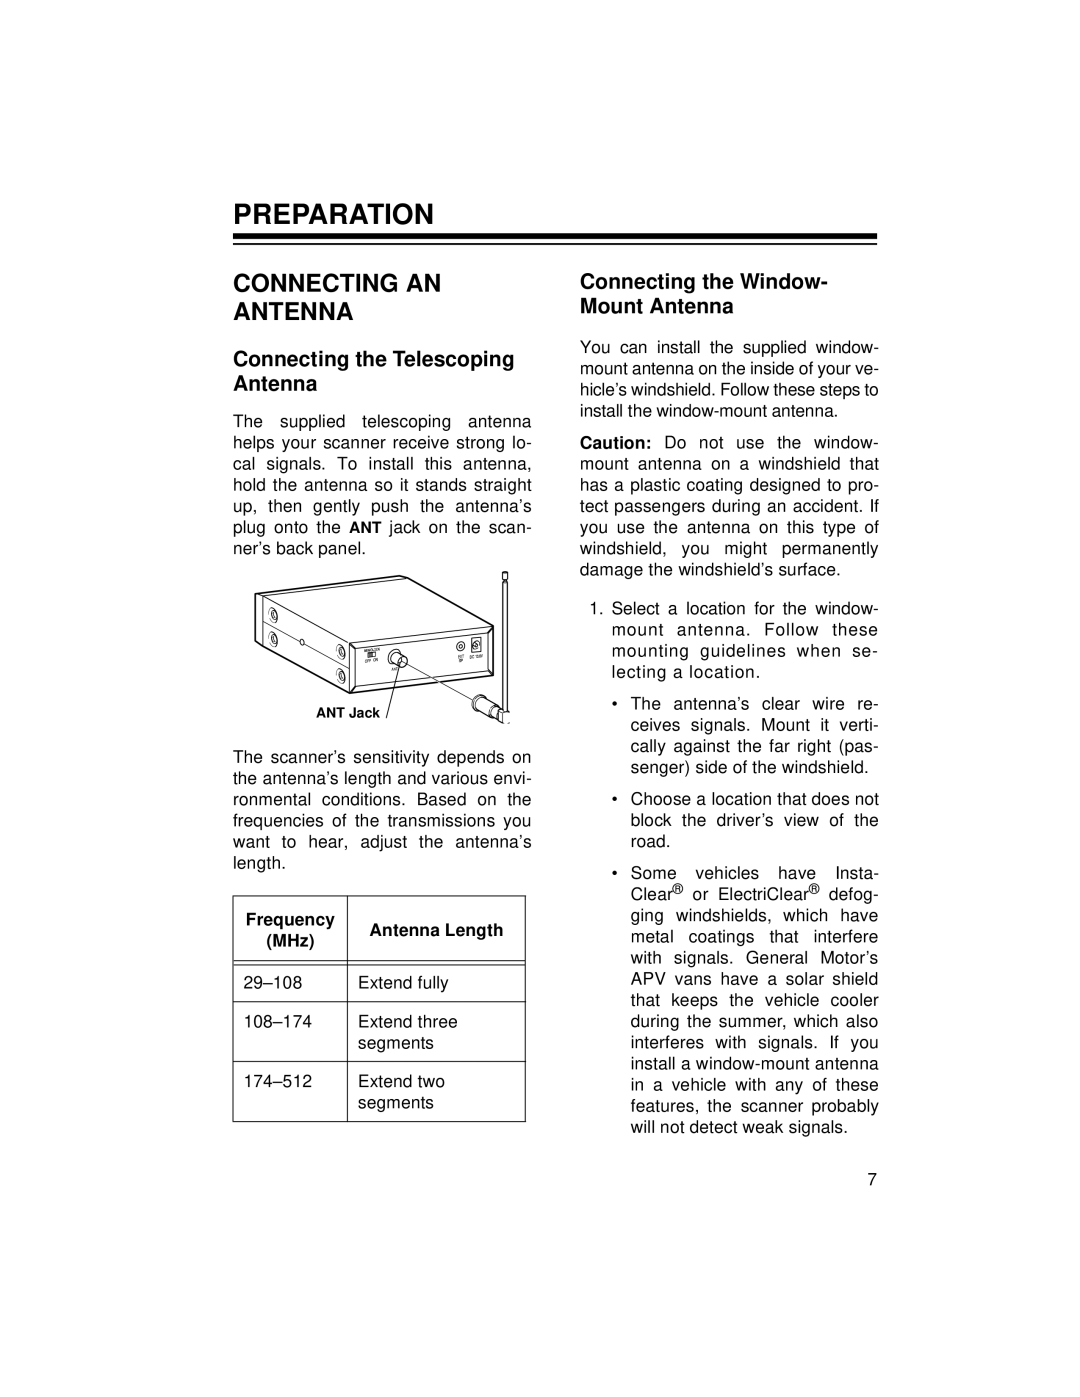 Radio Shack PRO-2056 owner manual Preparation, Connecting An Antenna, Connecting the Telescoping Antenna 